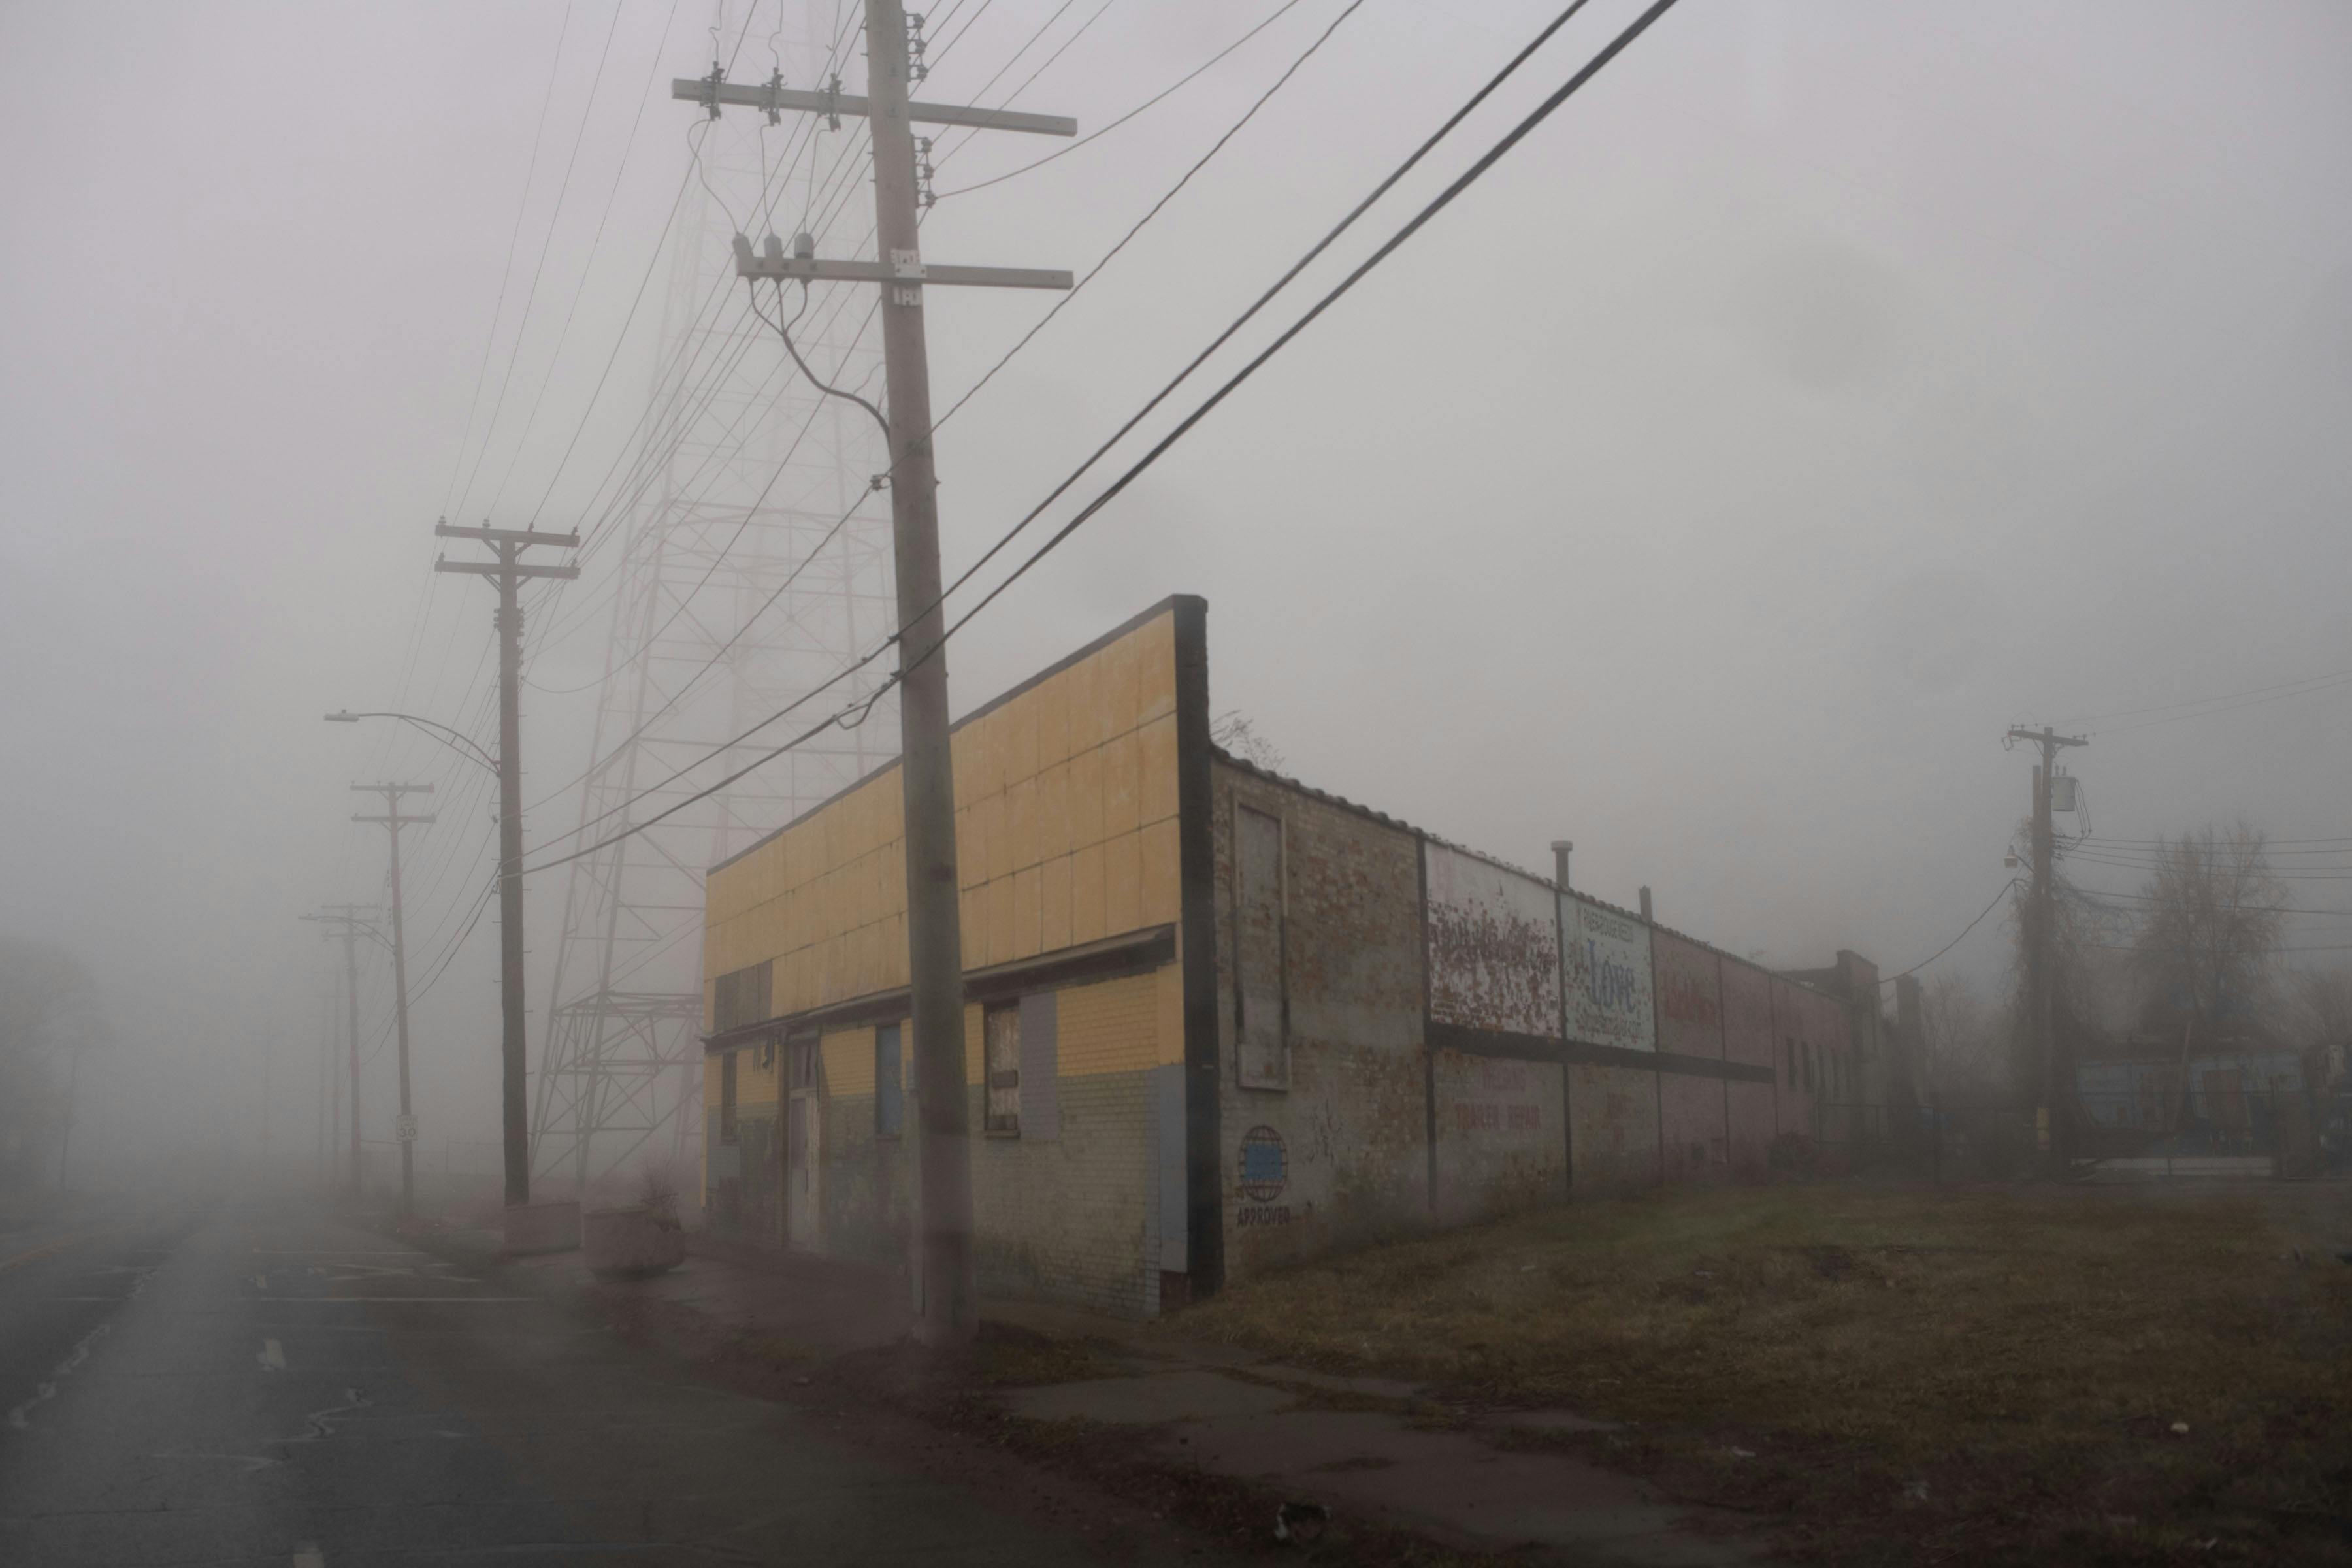 The Black Mechanism #28 by Todd Hido, Obscura Curated Commission.